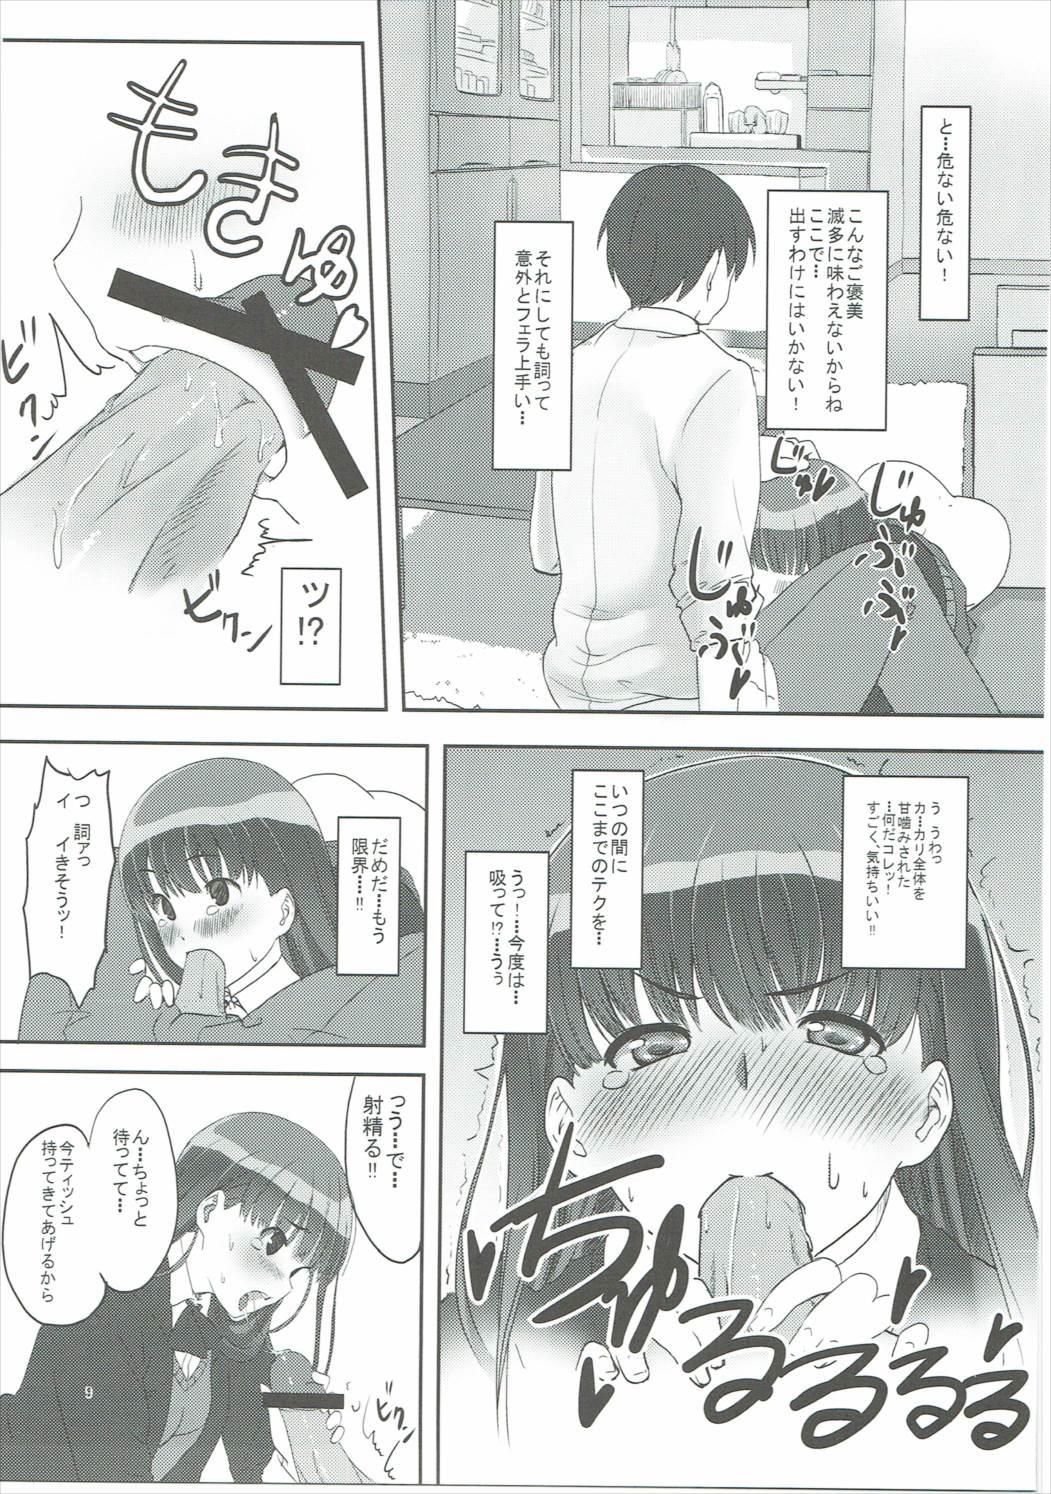 Blows Happy end! - Amagami Dominate - Page 10